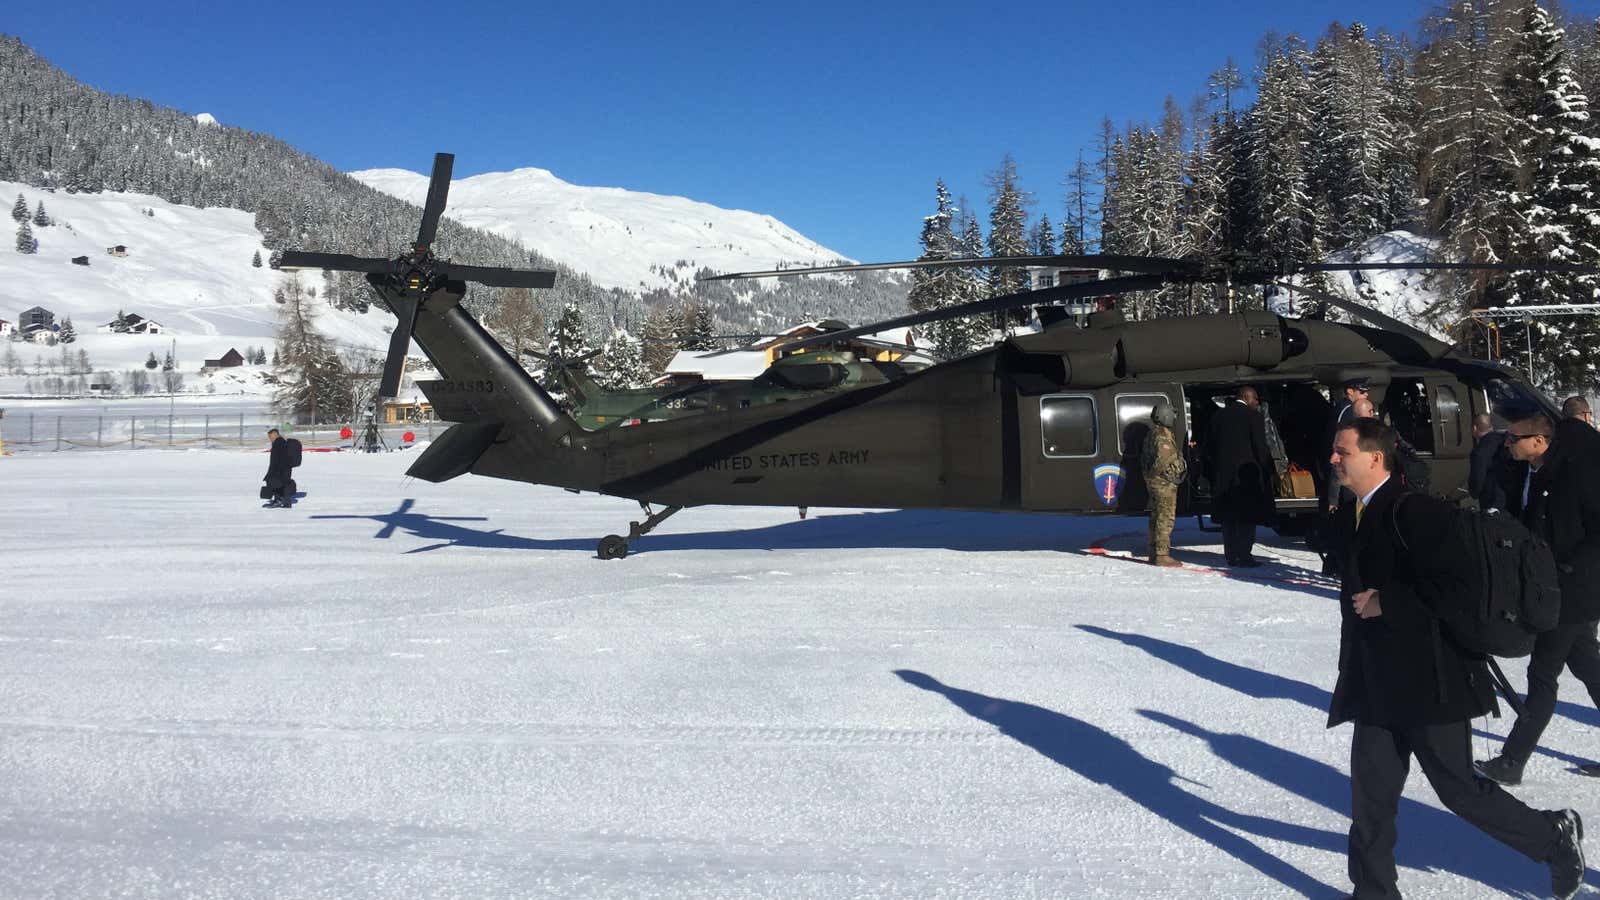 Likely the most spartan of Davos heli-tranports